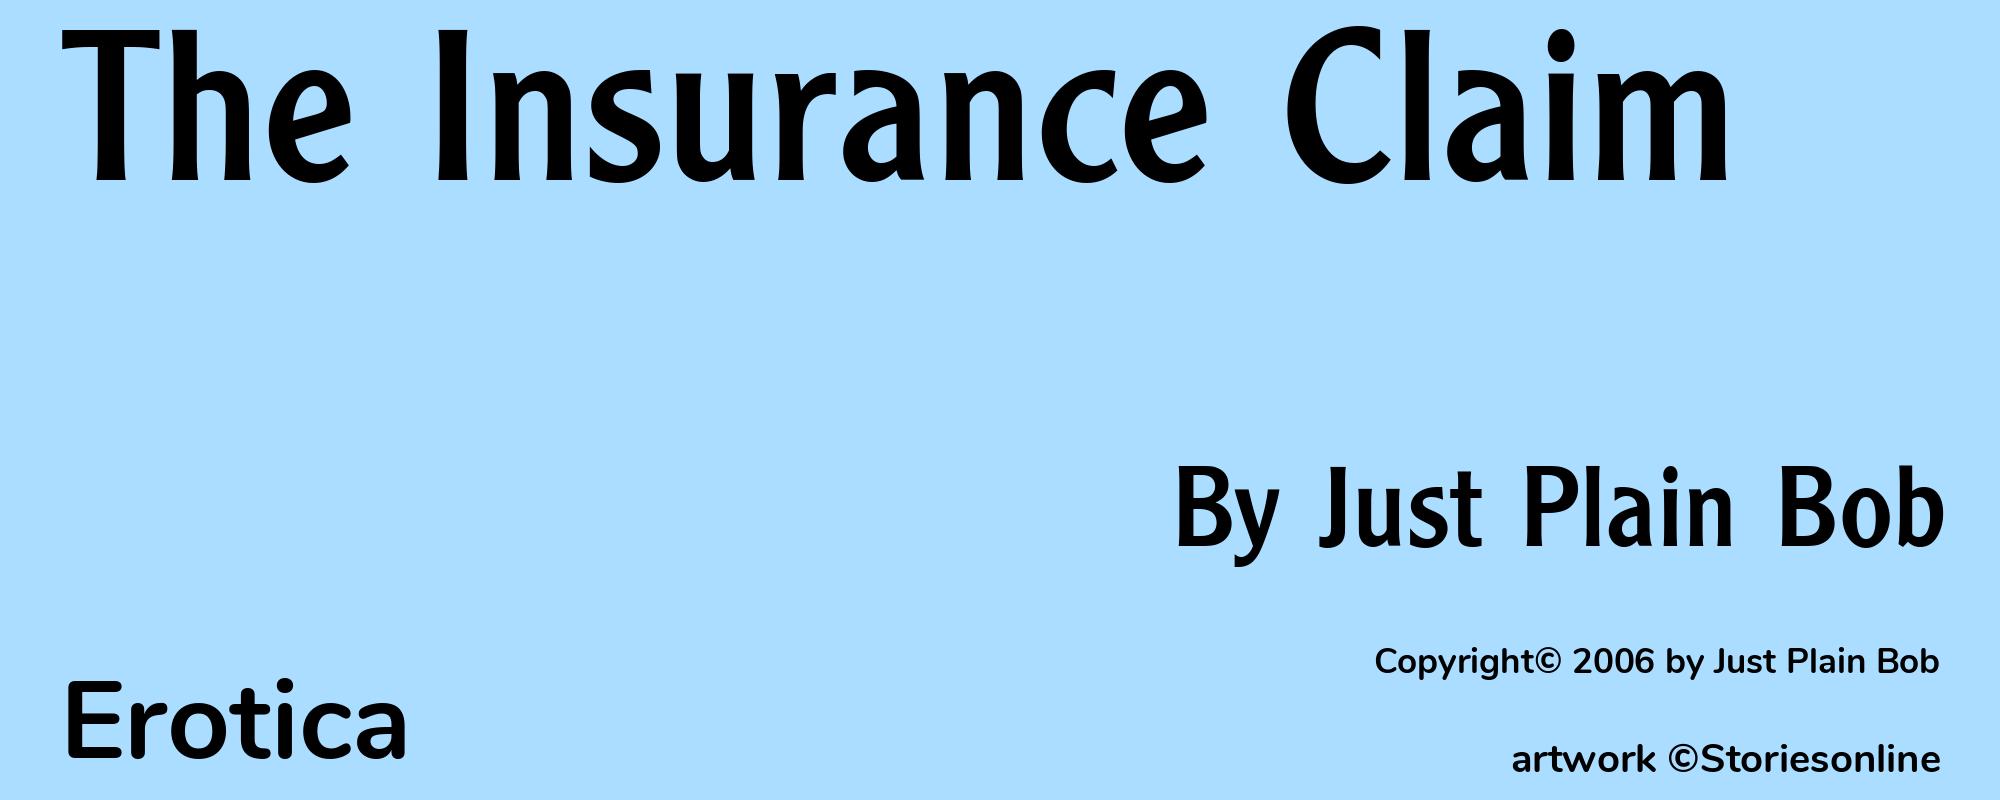 The Insurance Claim - Cover